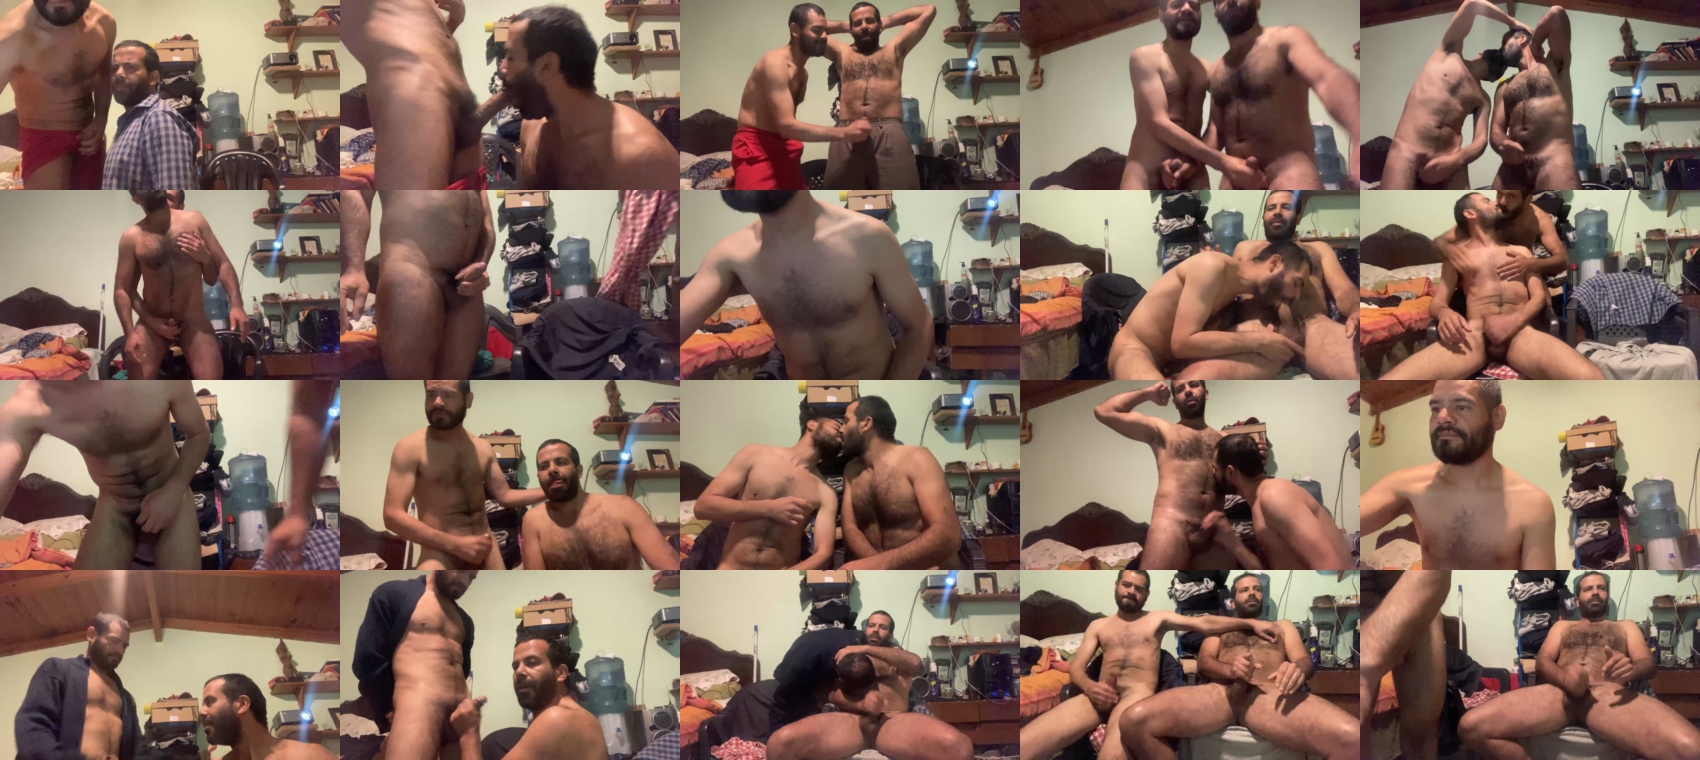 hairies1981  01-11-2023 Recorded Video twink